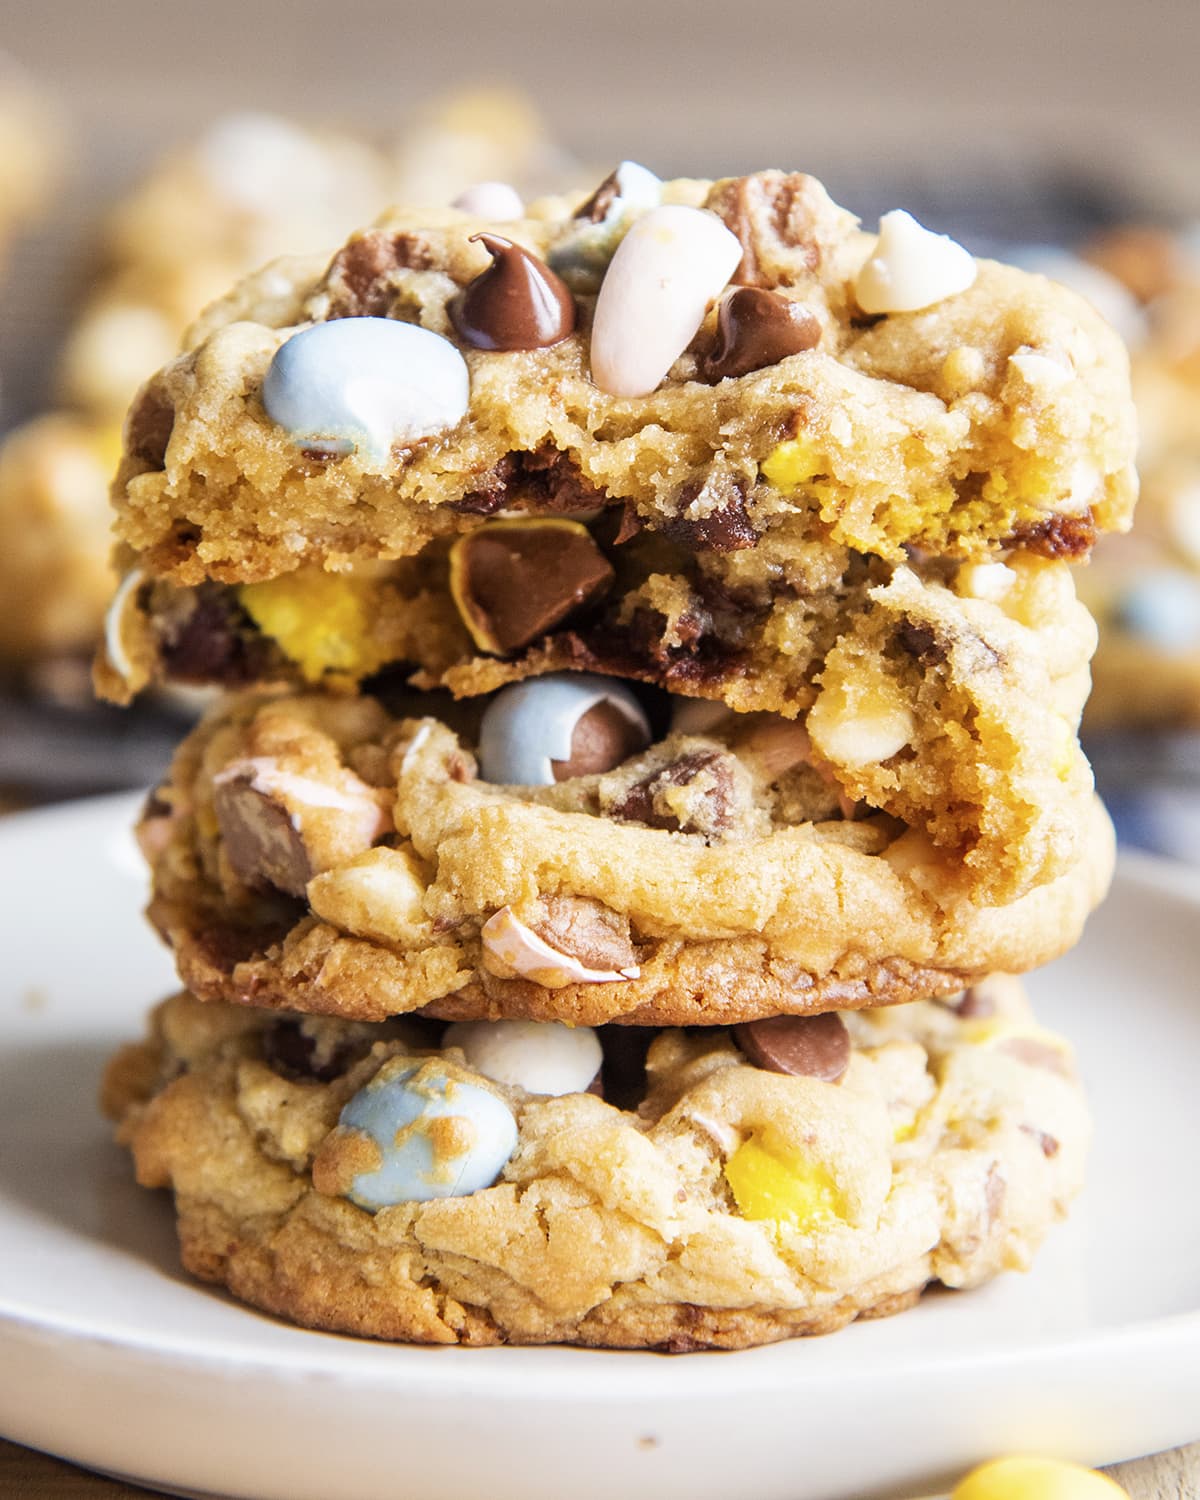 A stack of large cookies full of chocolate chips and cadbury mini eggs.